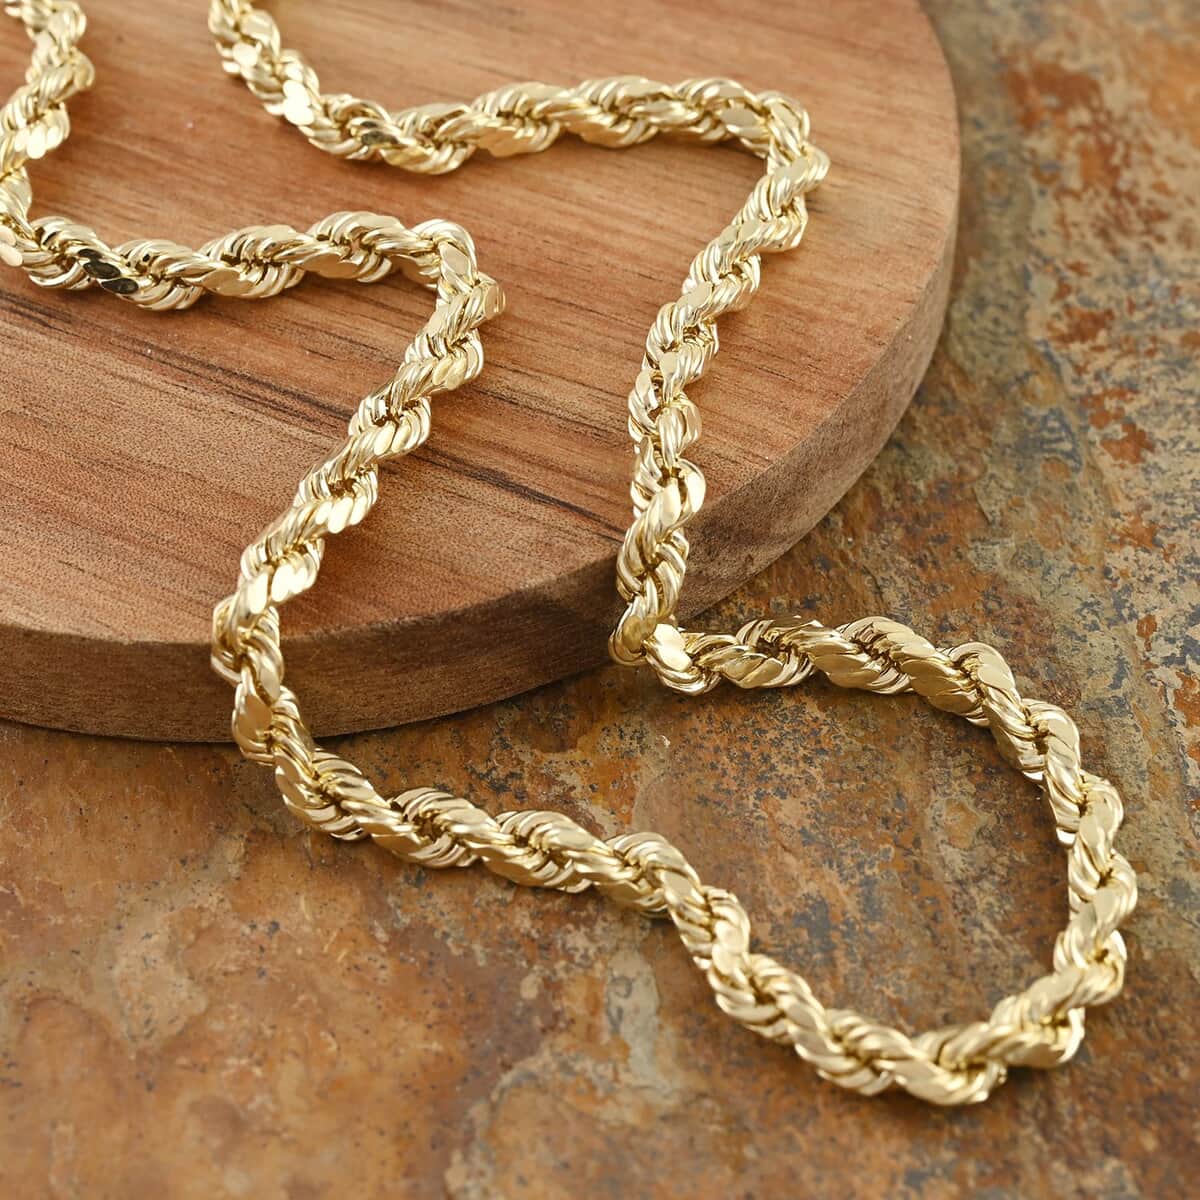 10K Yellow Gold 6mm Rope Chain Necklace 24 Inches 12.6 Grams